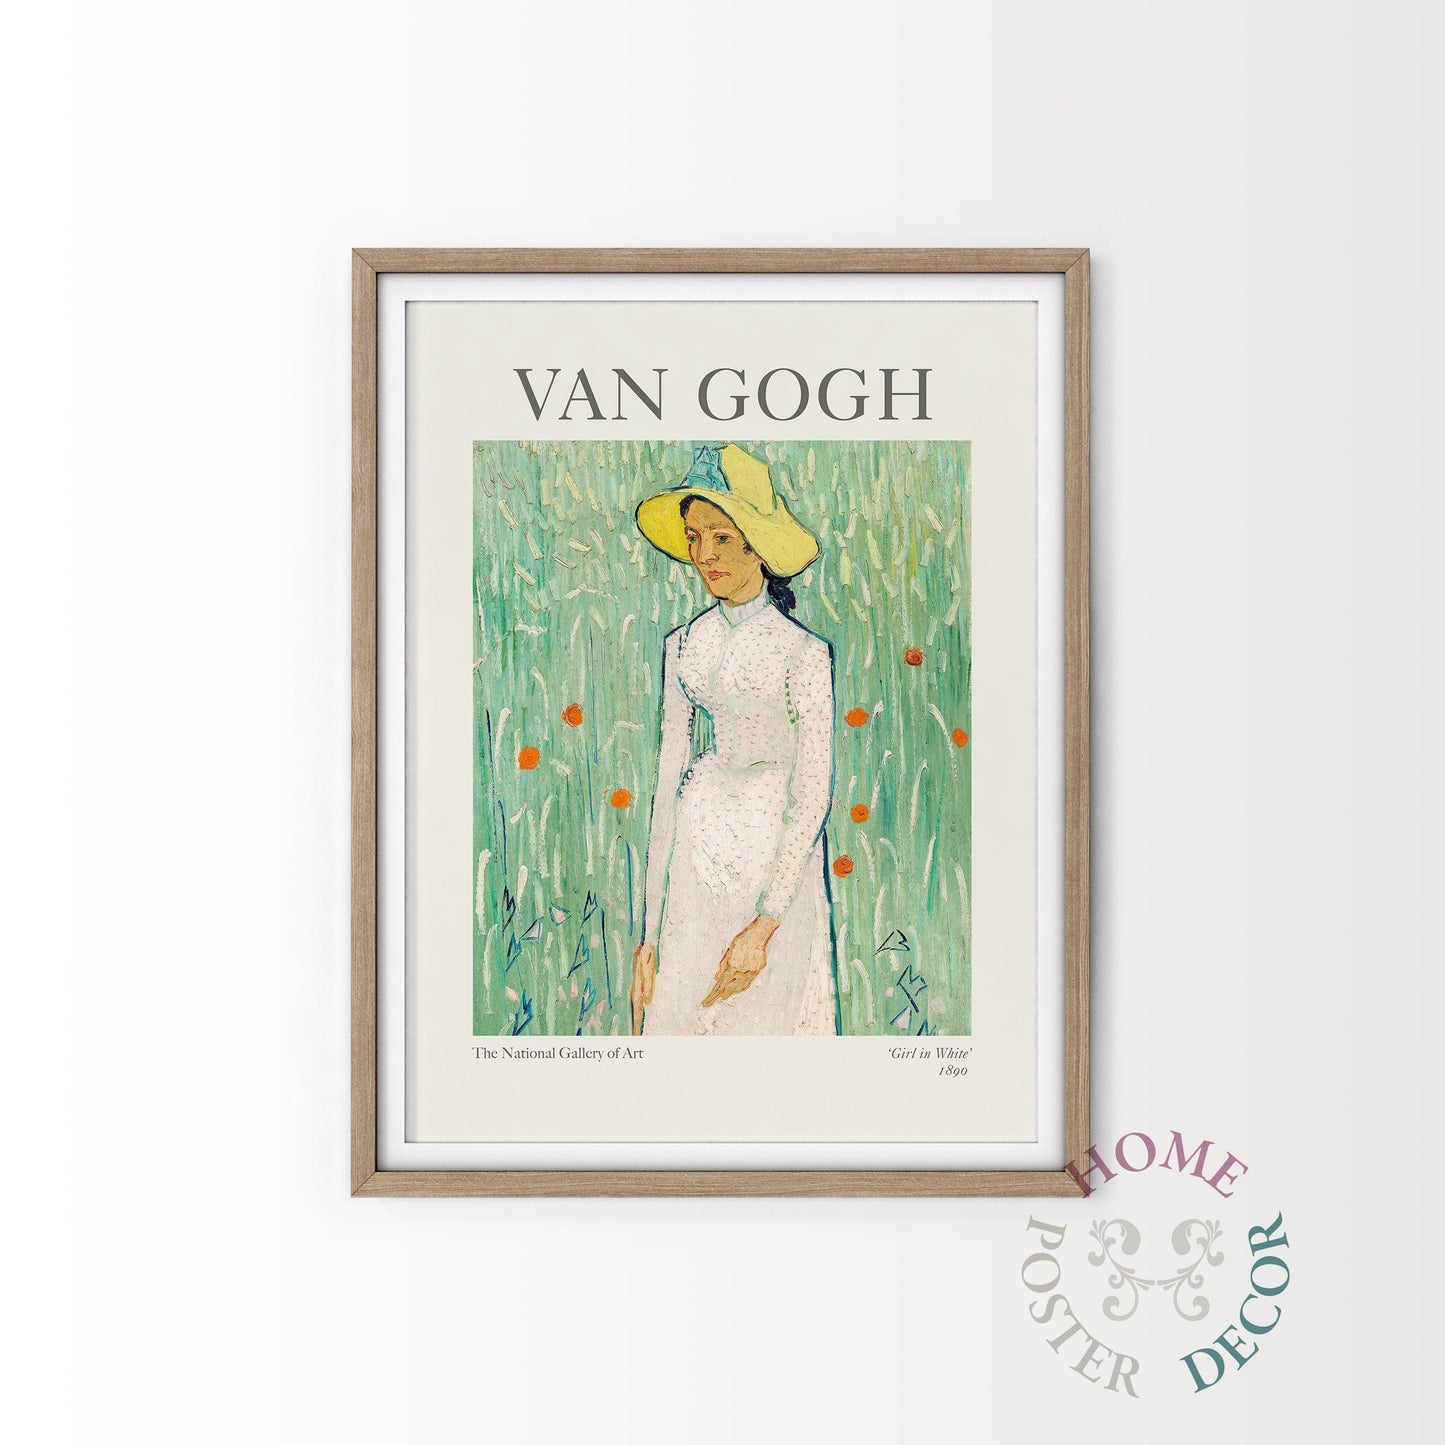 Home Poster Decor Single Van Gogh Wall Art Poster, Girl in White, Gallery Wall